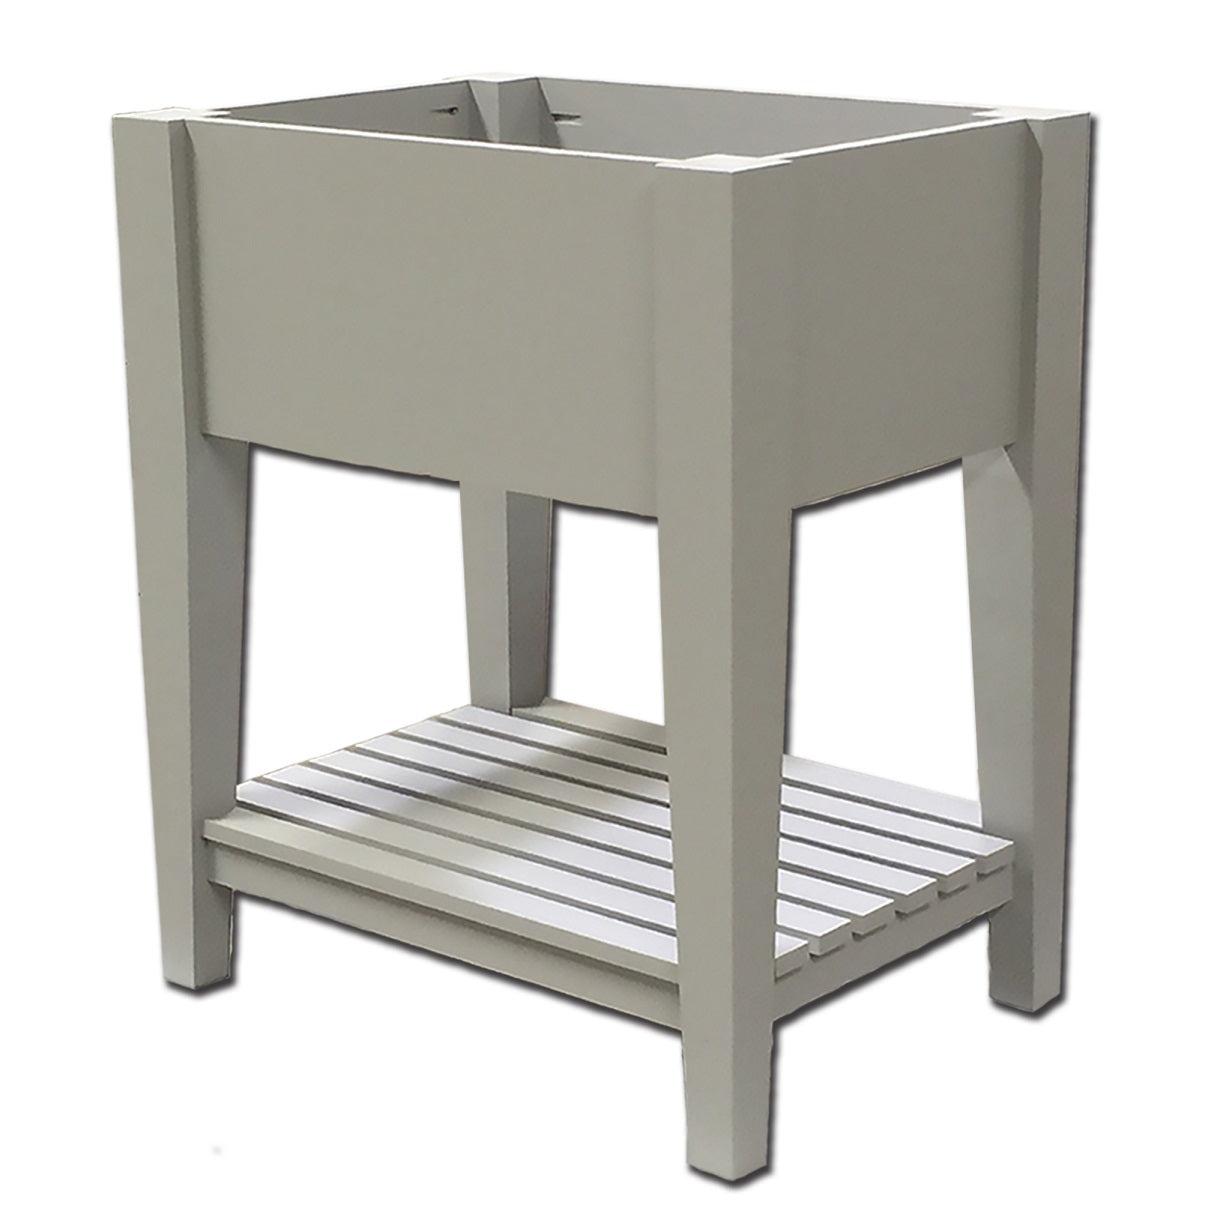 Castlewood SY-VTL Tapered Vanity Base with Ventilated Shelving